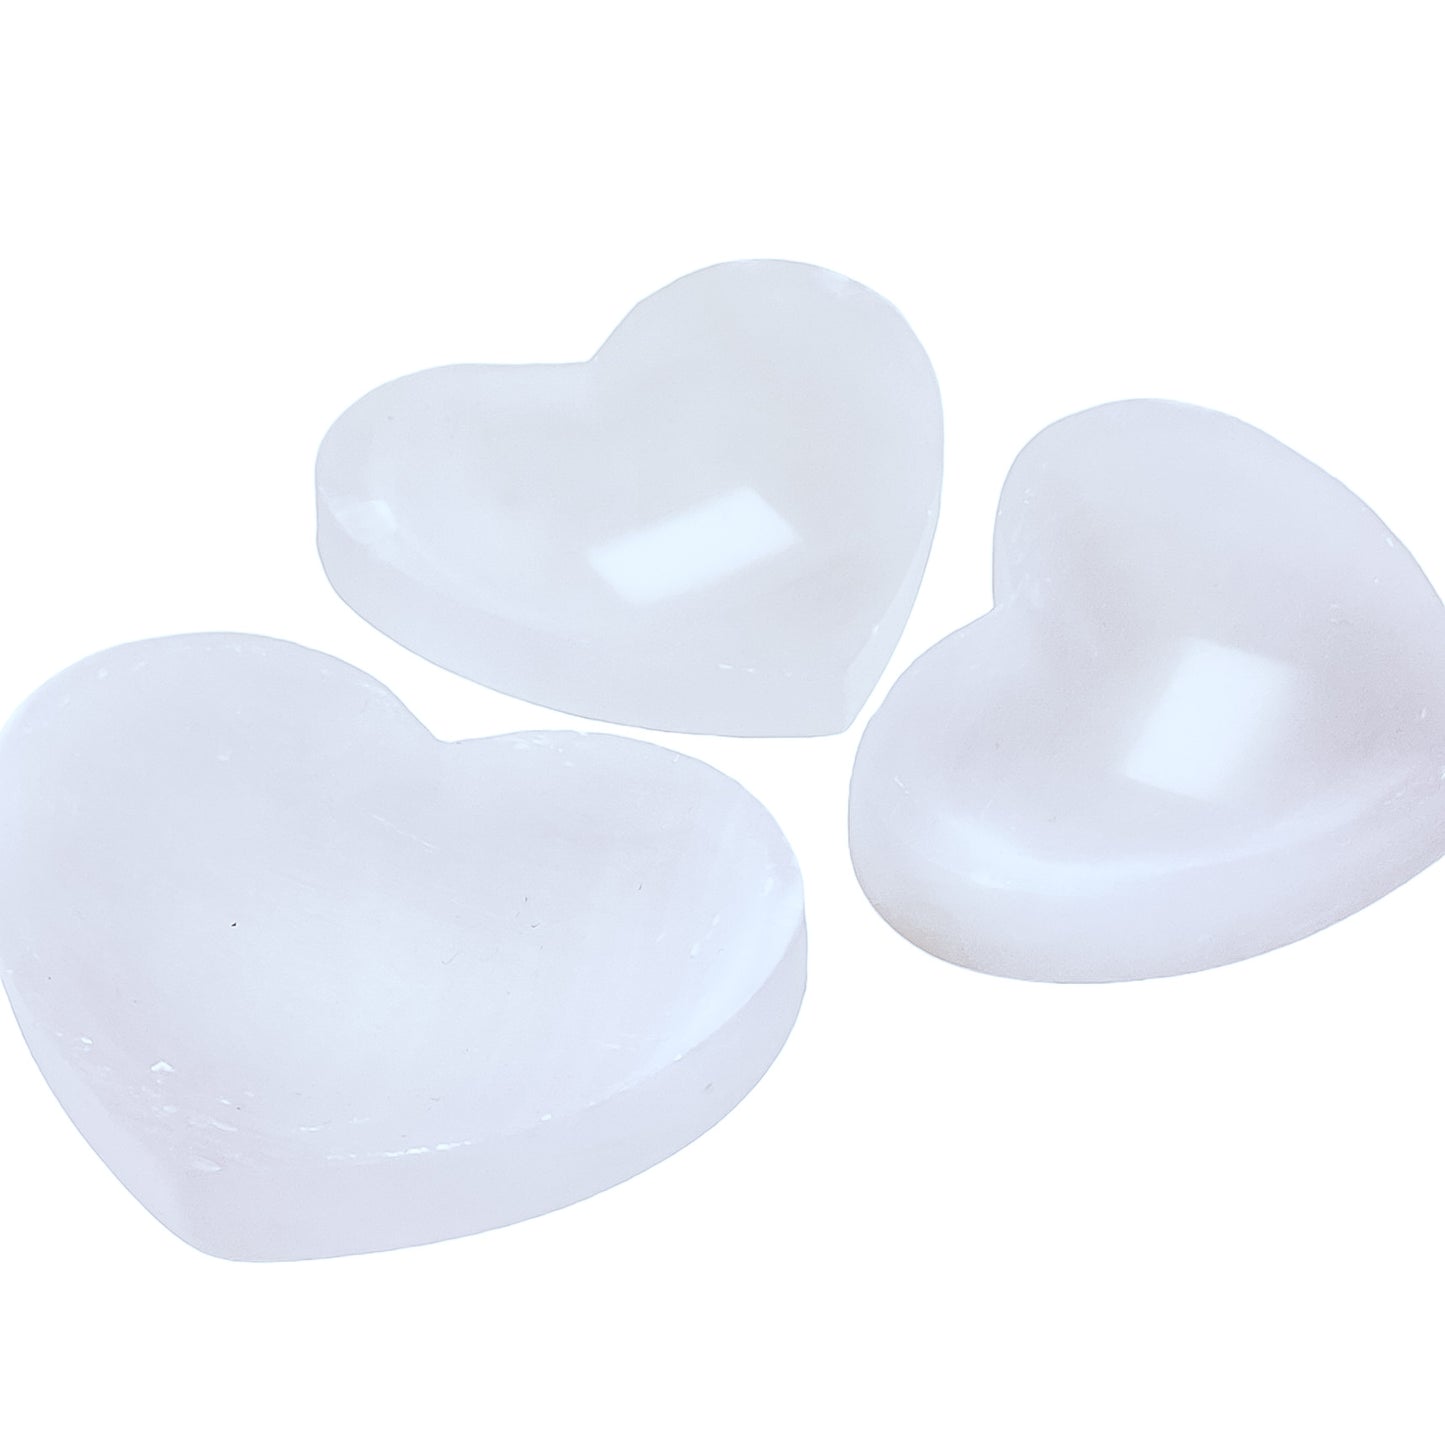 Selenite Heart Crystal Cleansing and Charging Bowl